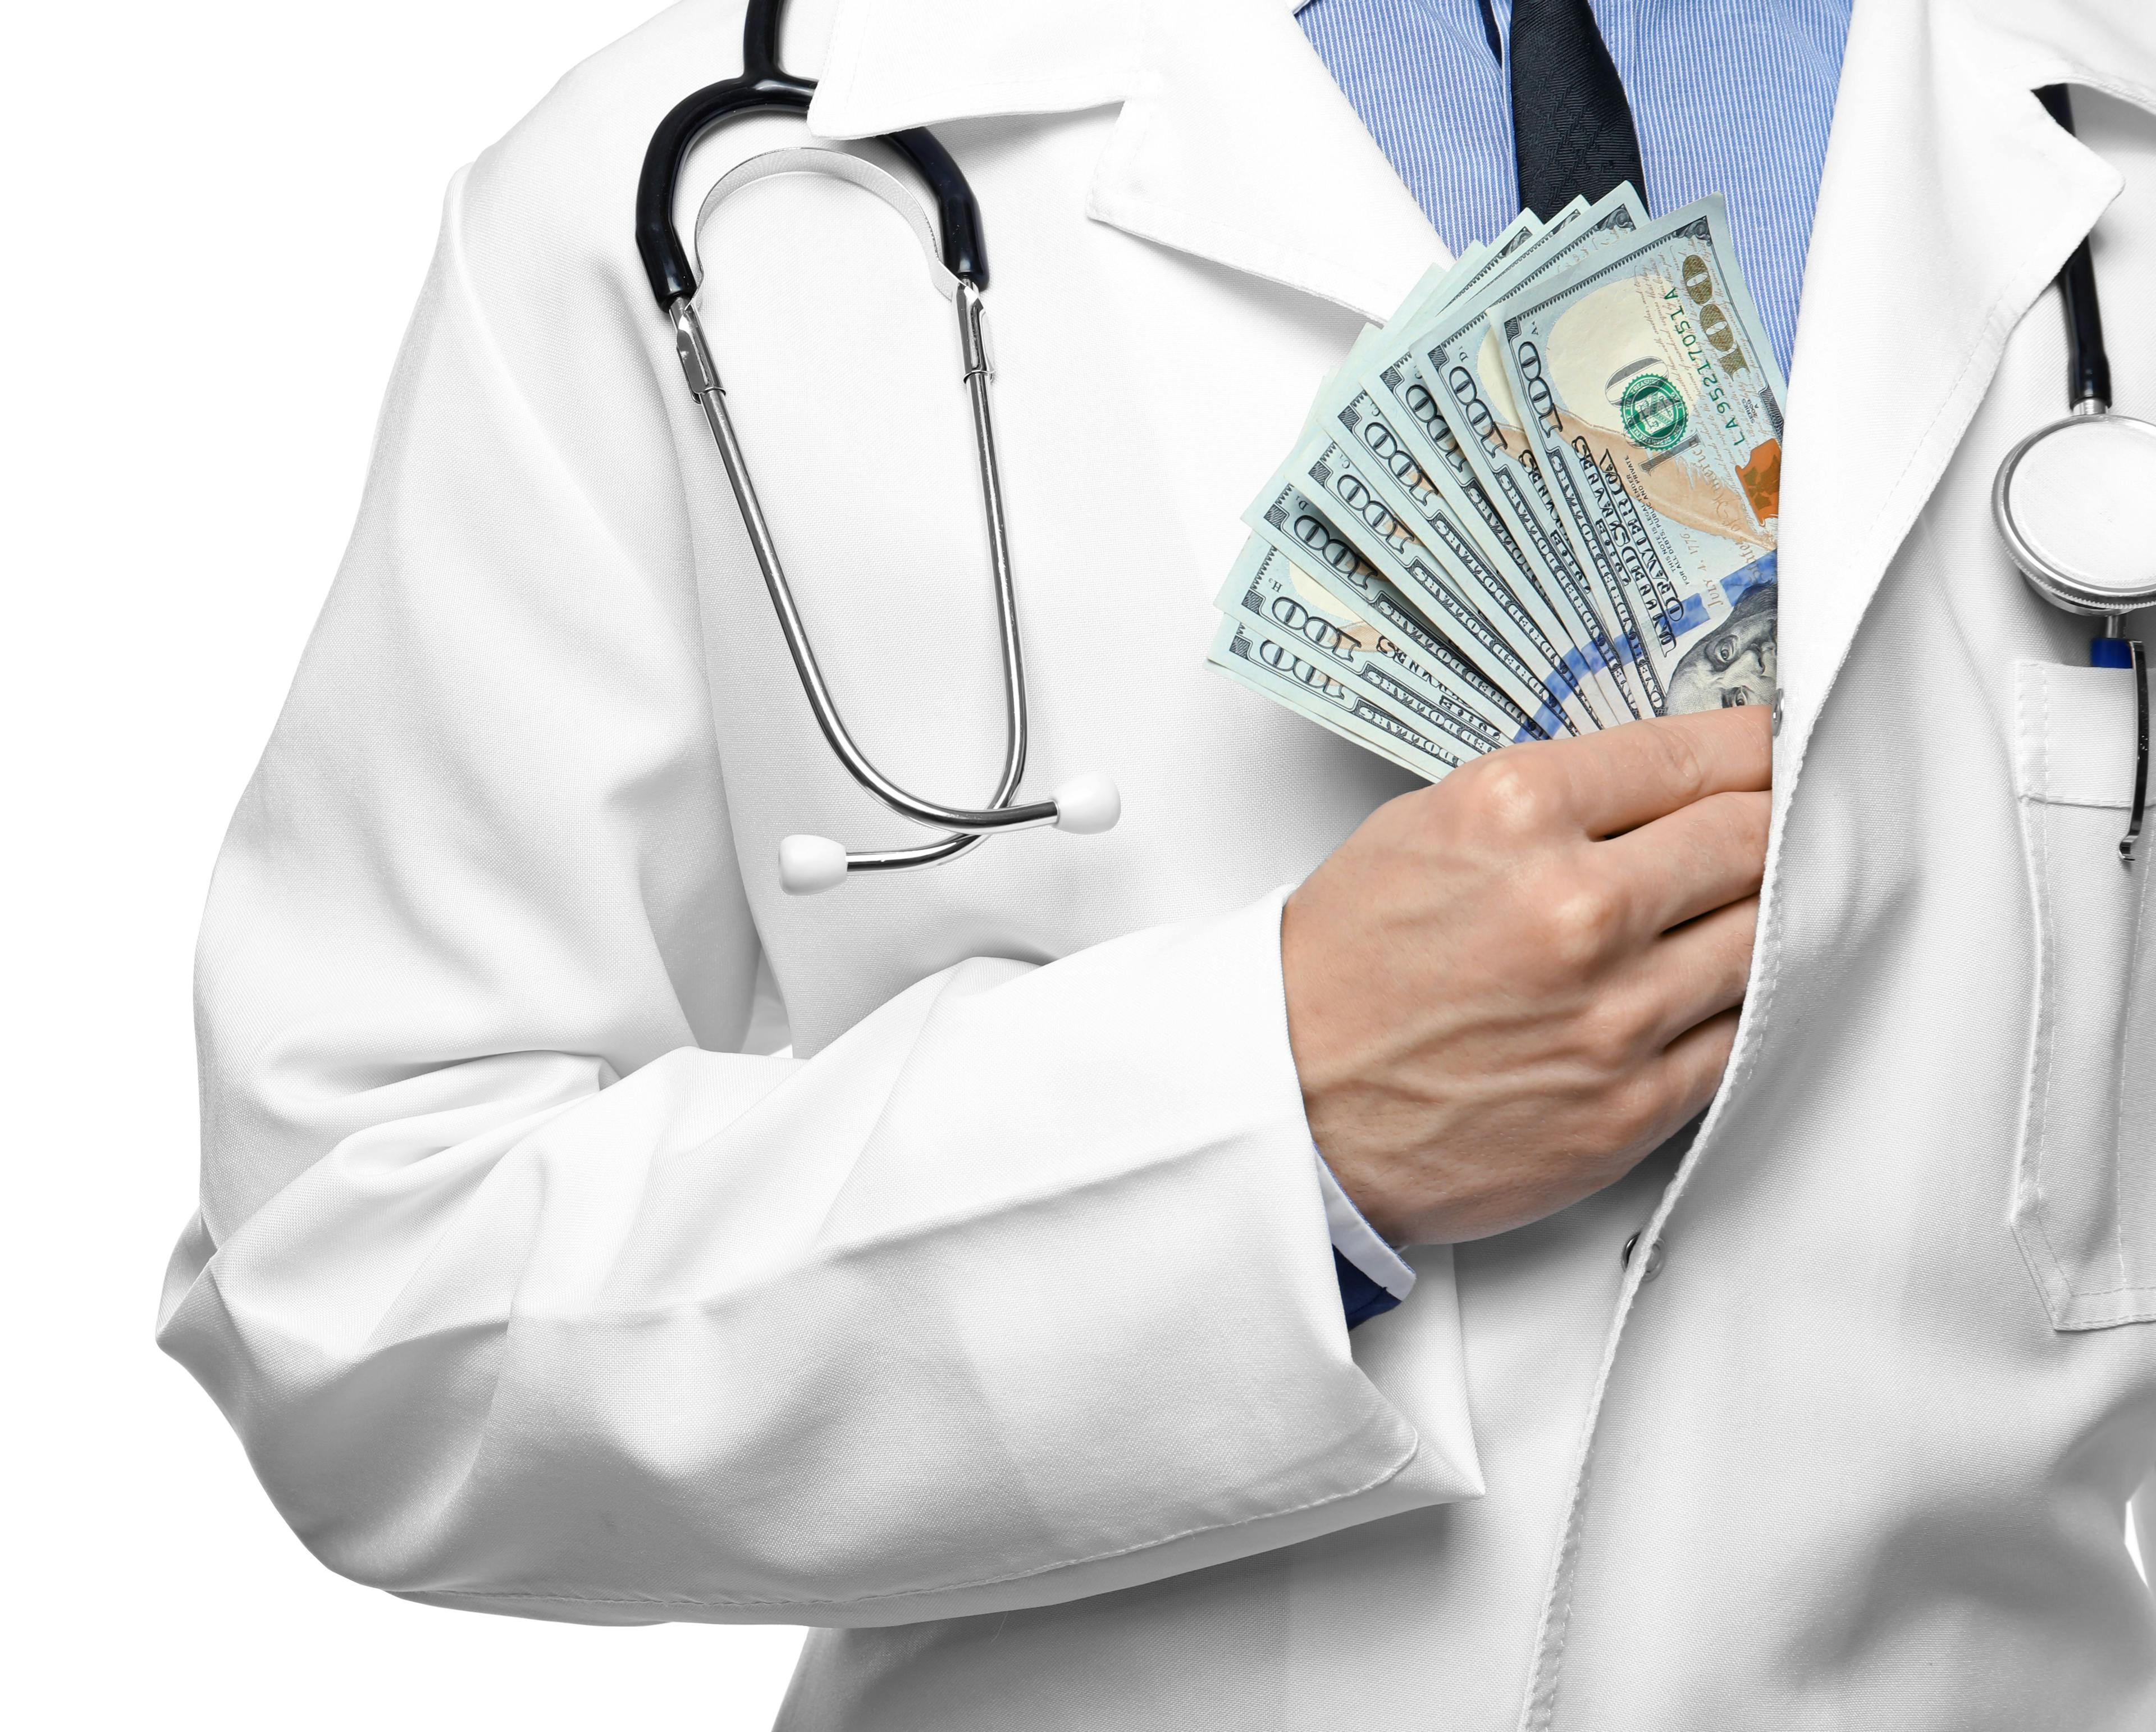 HHS distributing $560 Million to physicians affected by the pandemic